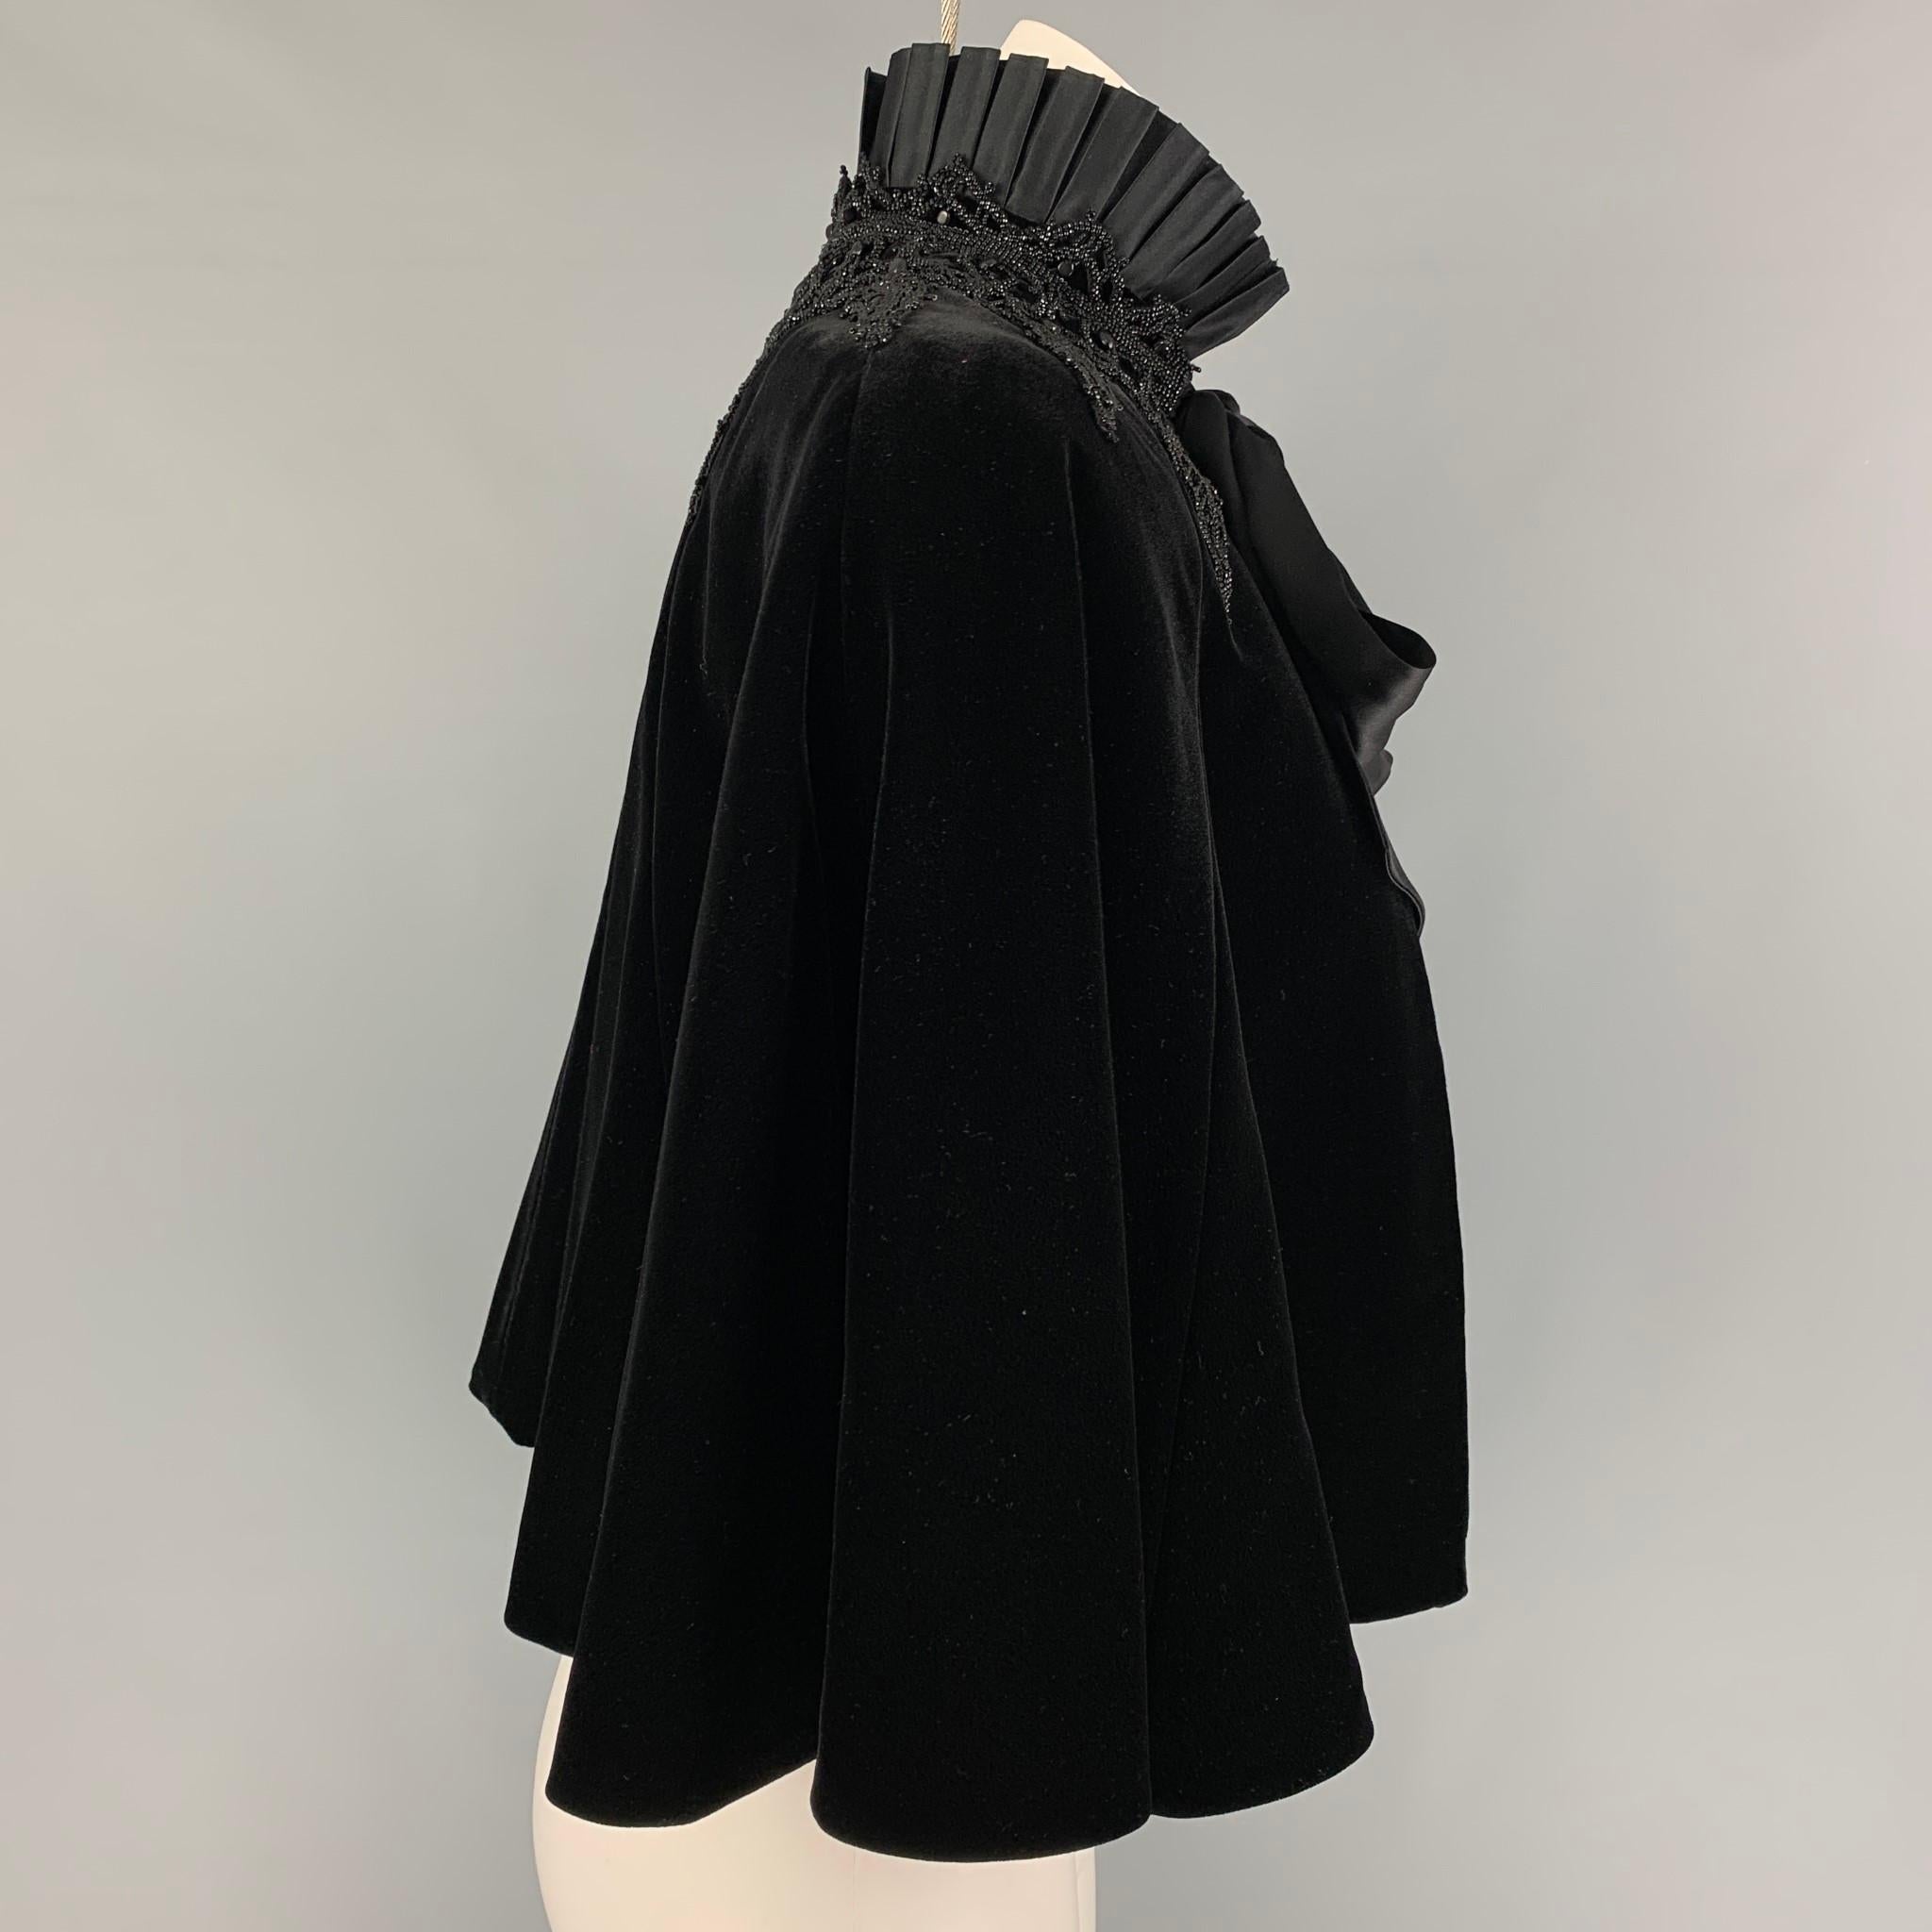 RALPH LAUREN 'Black Label' cape comes in a black velvet viscose with a silk lining featuring a pleated collar, beaded embellishments, and a self tie bow closure. 

Very Good Pre-Owned Condition.
Marked: XS/S
Original Retail Price: